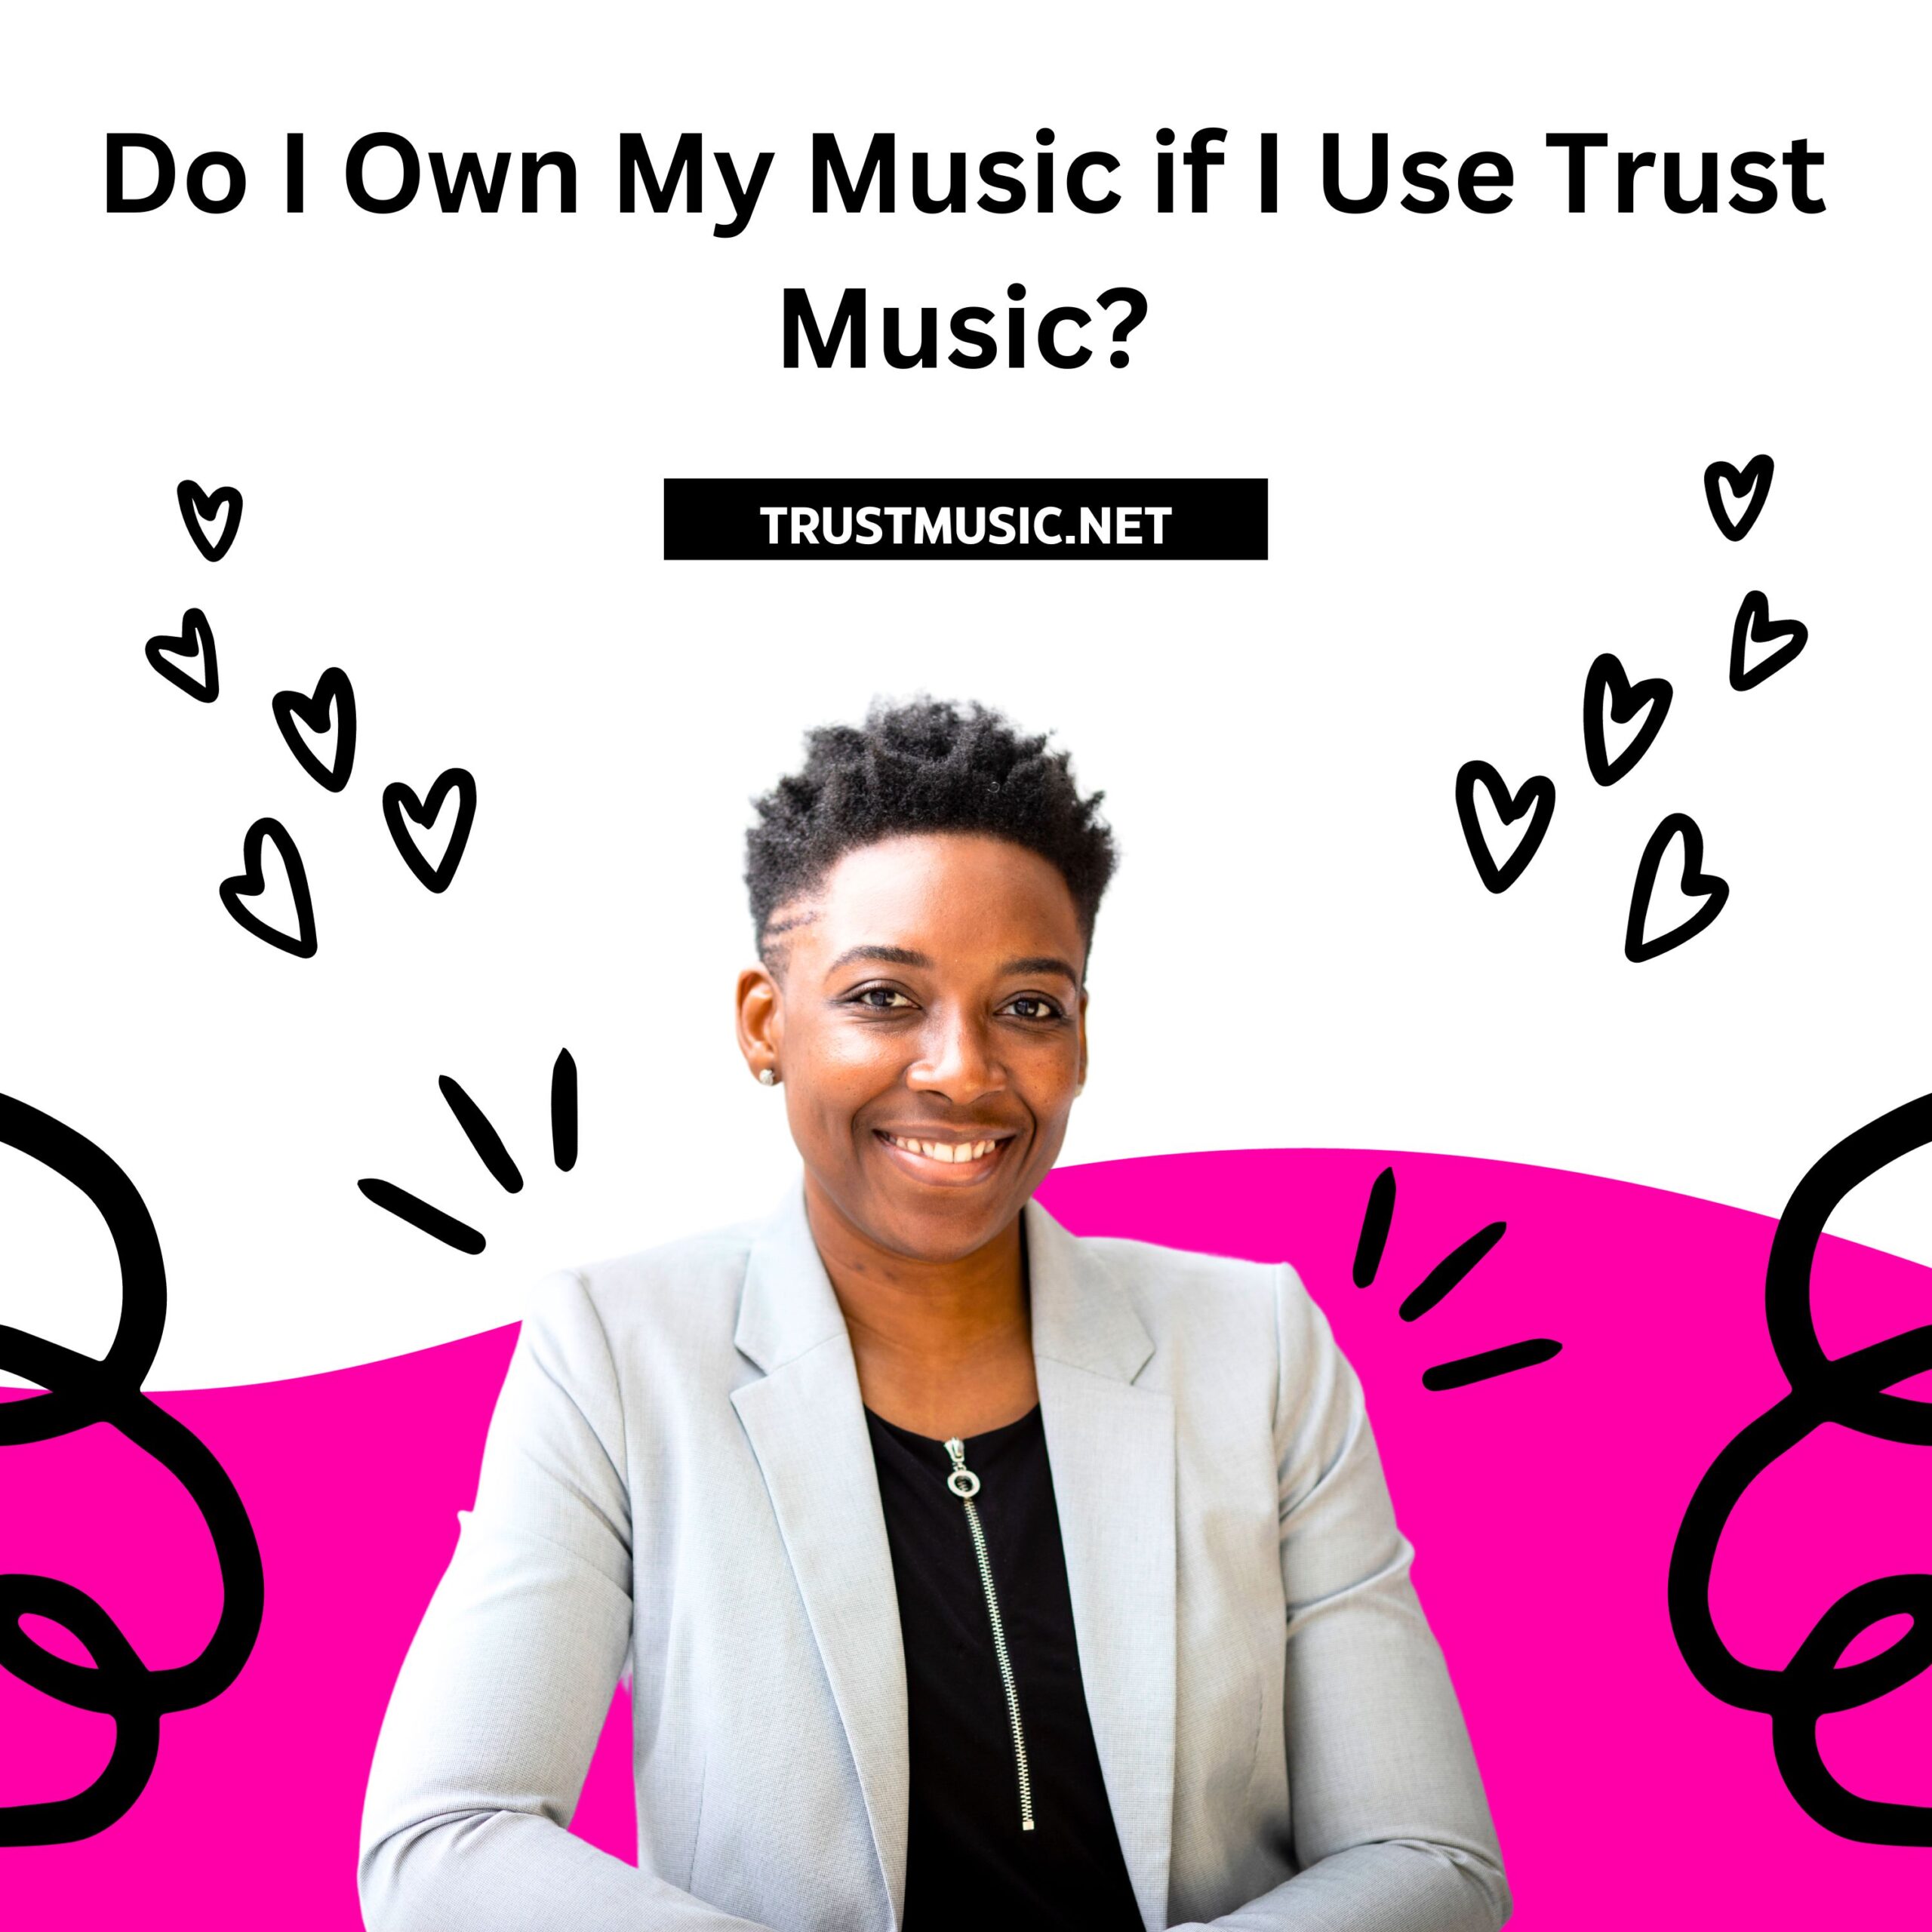 Do I Own My Music if I Use Trust Music